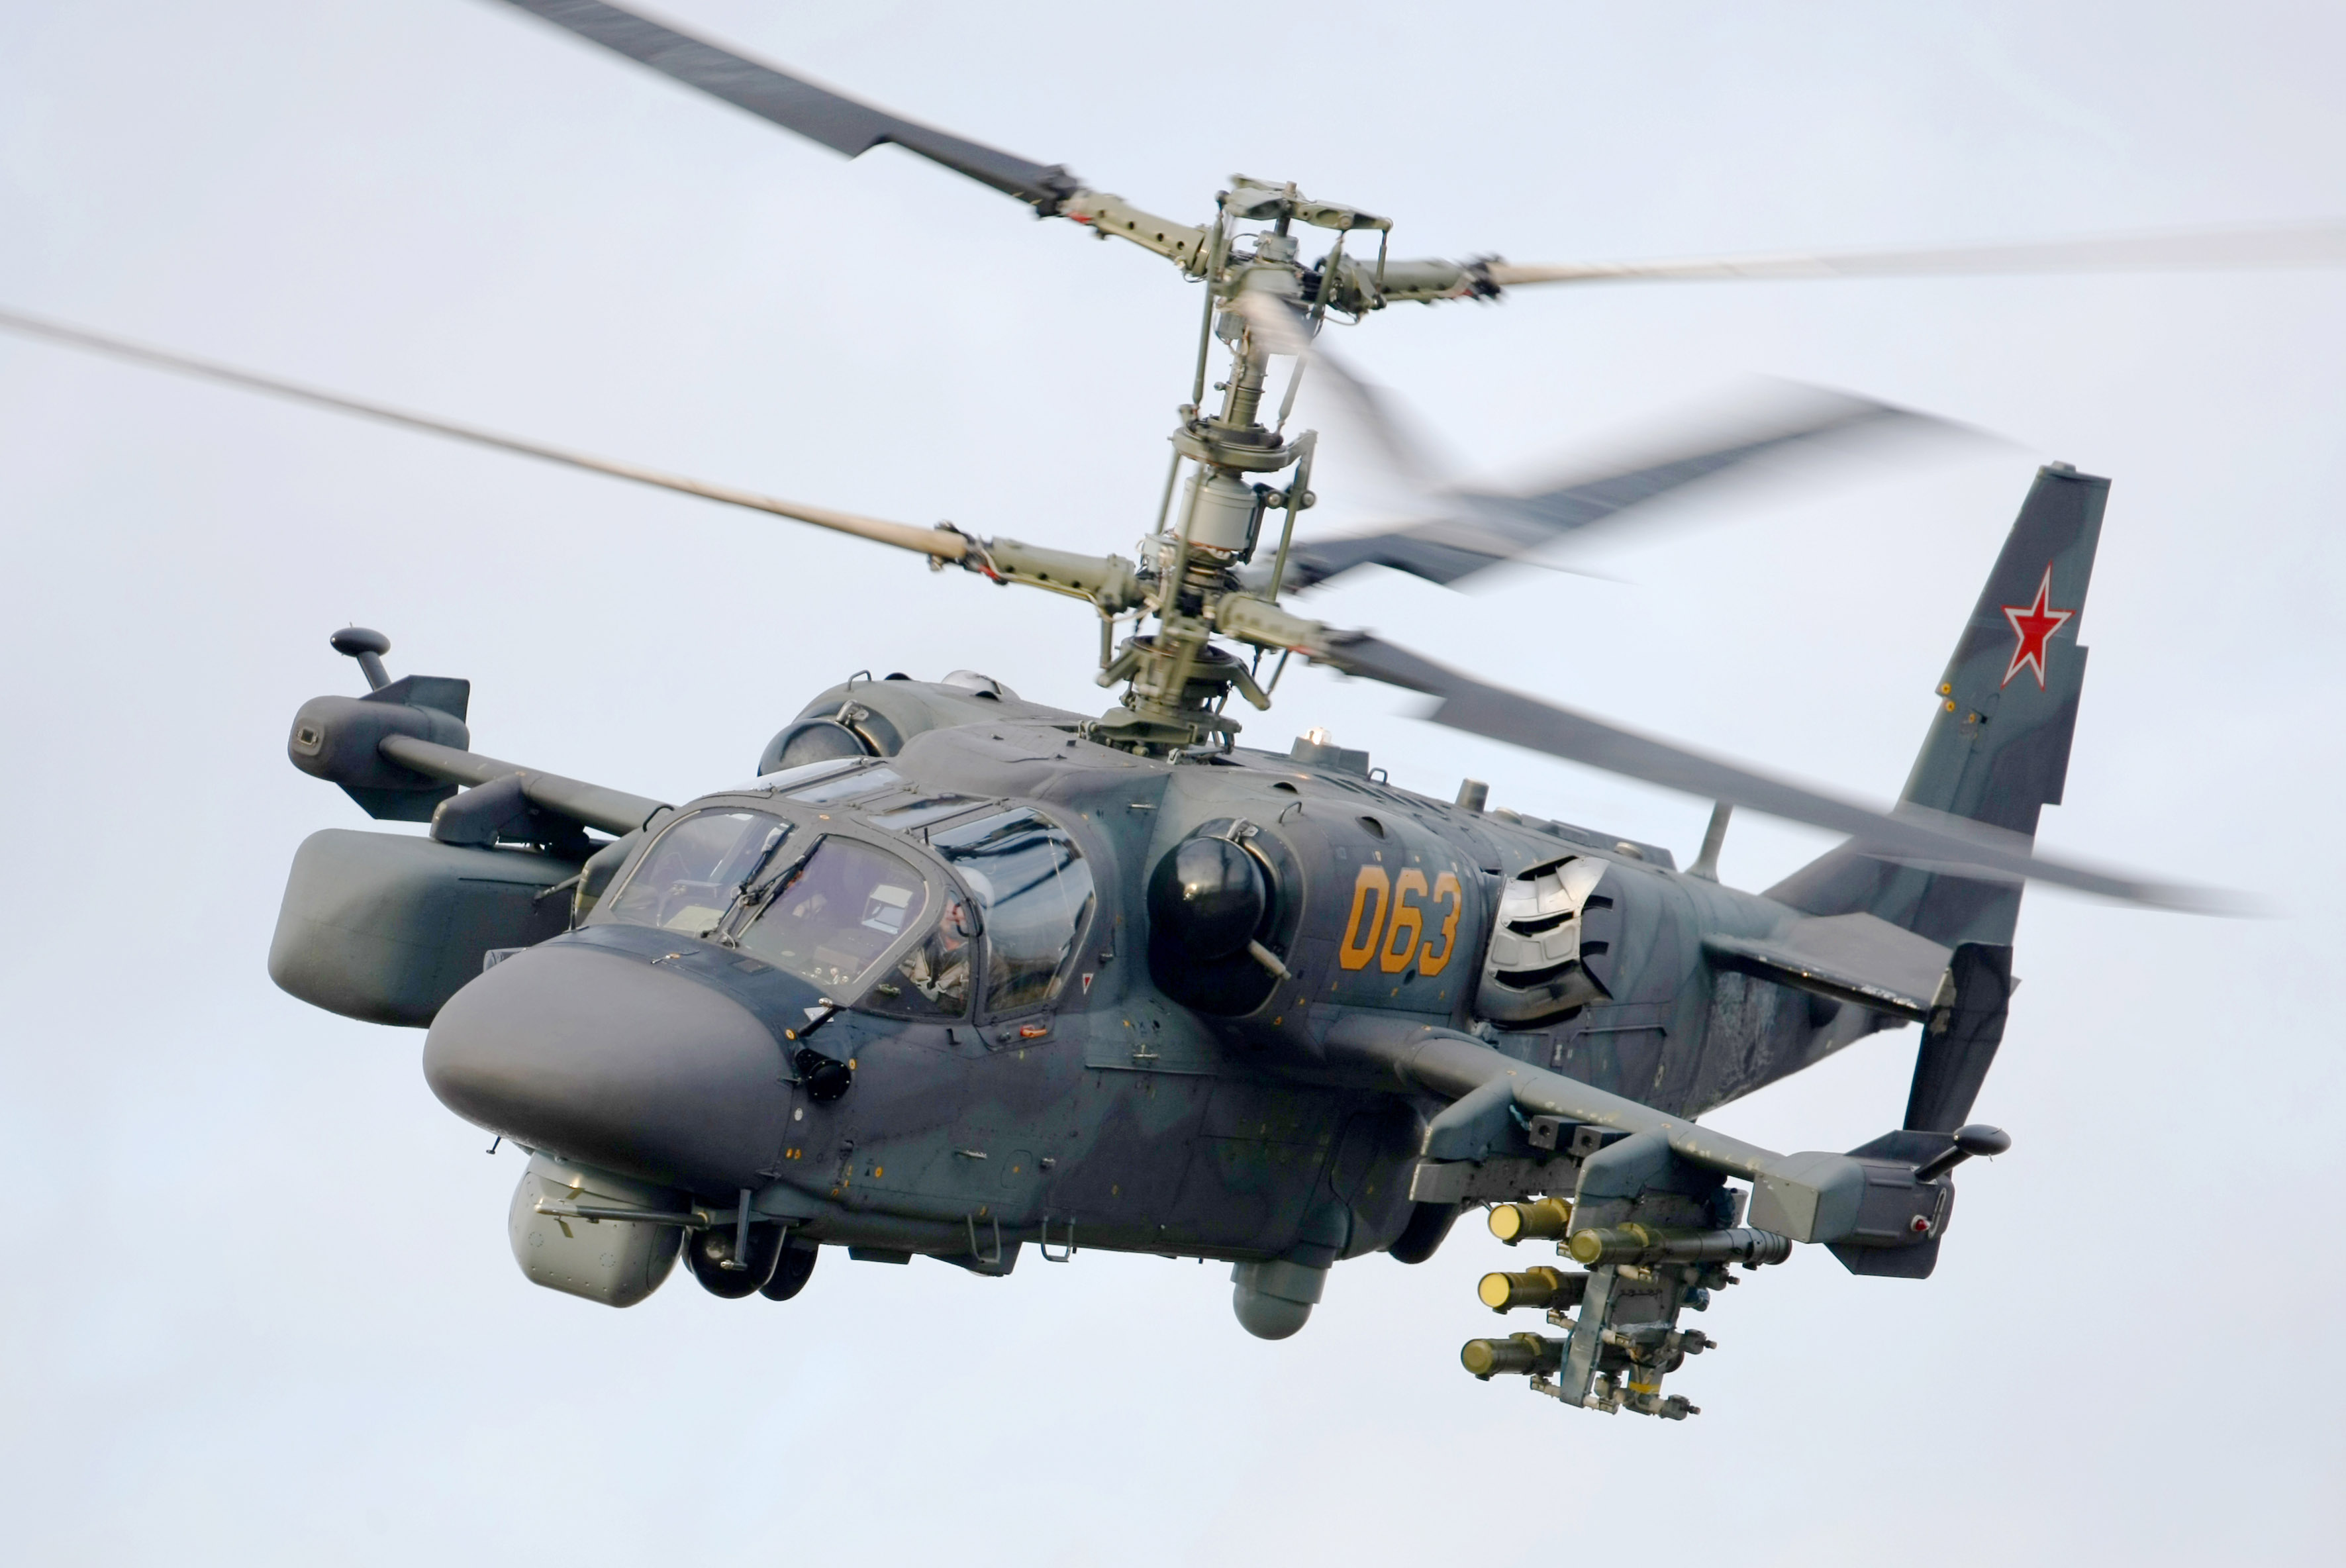 Minus $16,000,000: A Russian Ka-52 helicopter went down in Kherson Oblast without AFU assistance